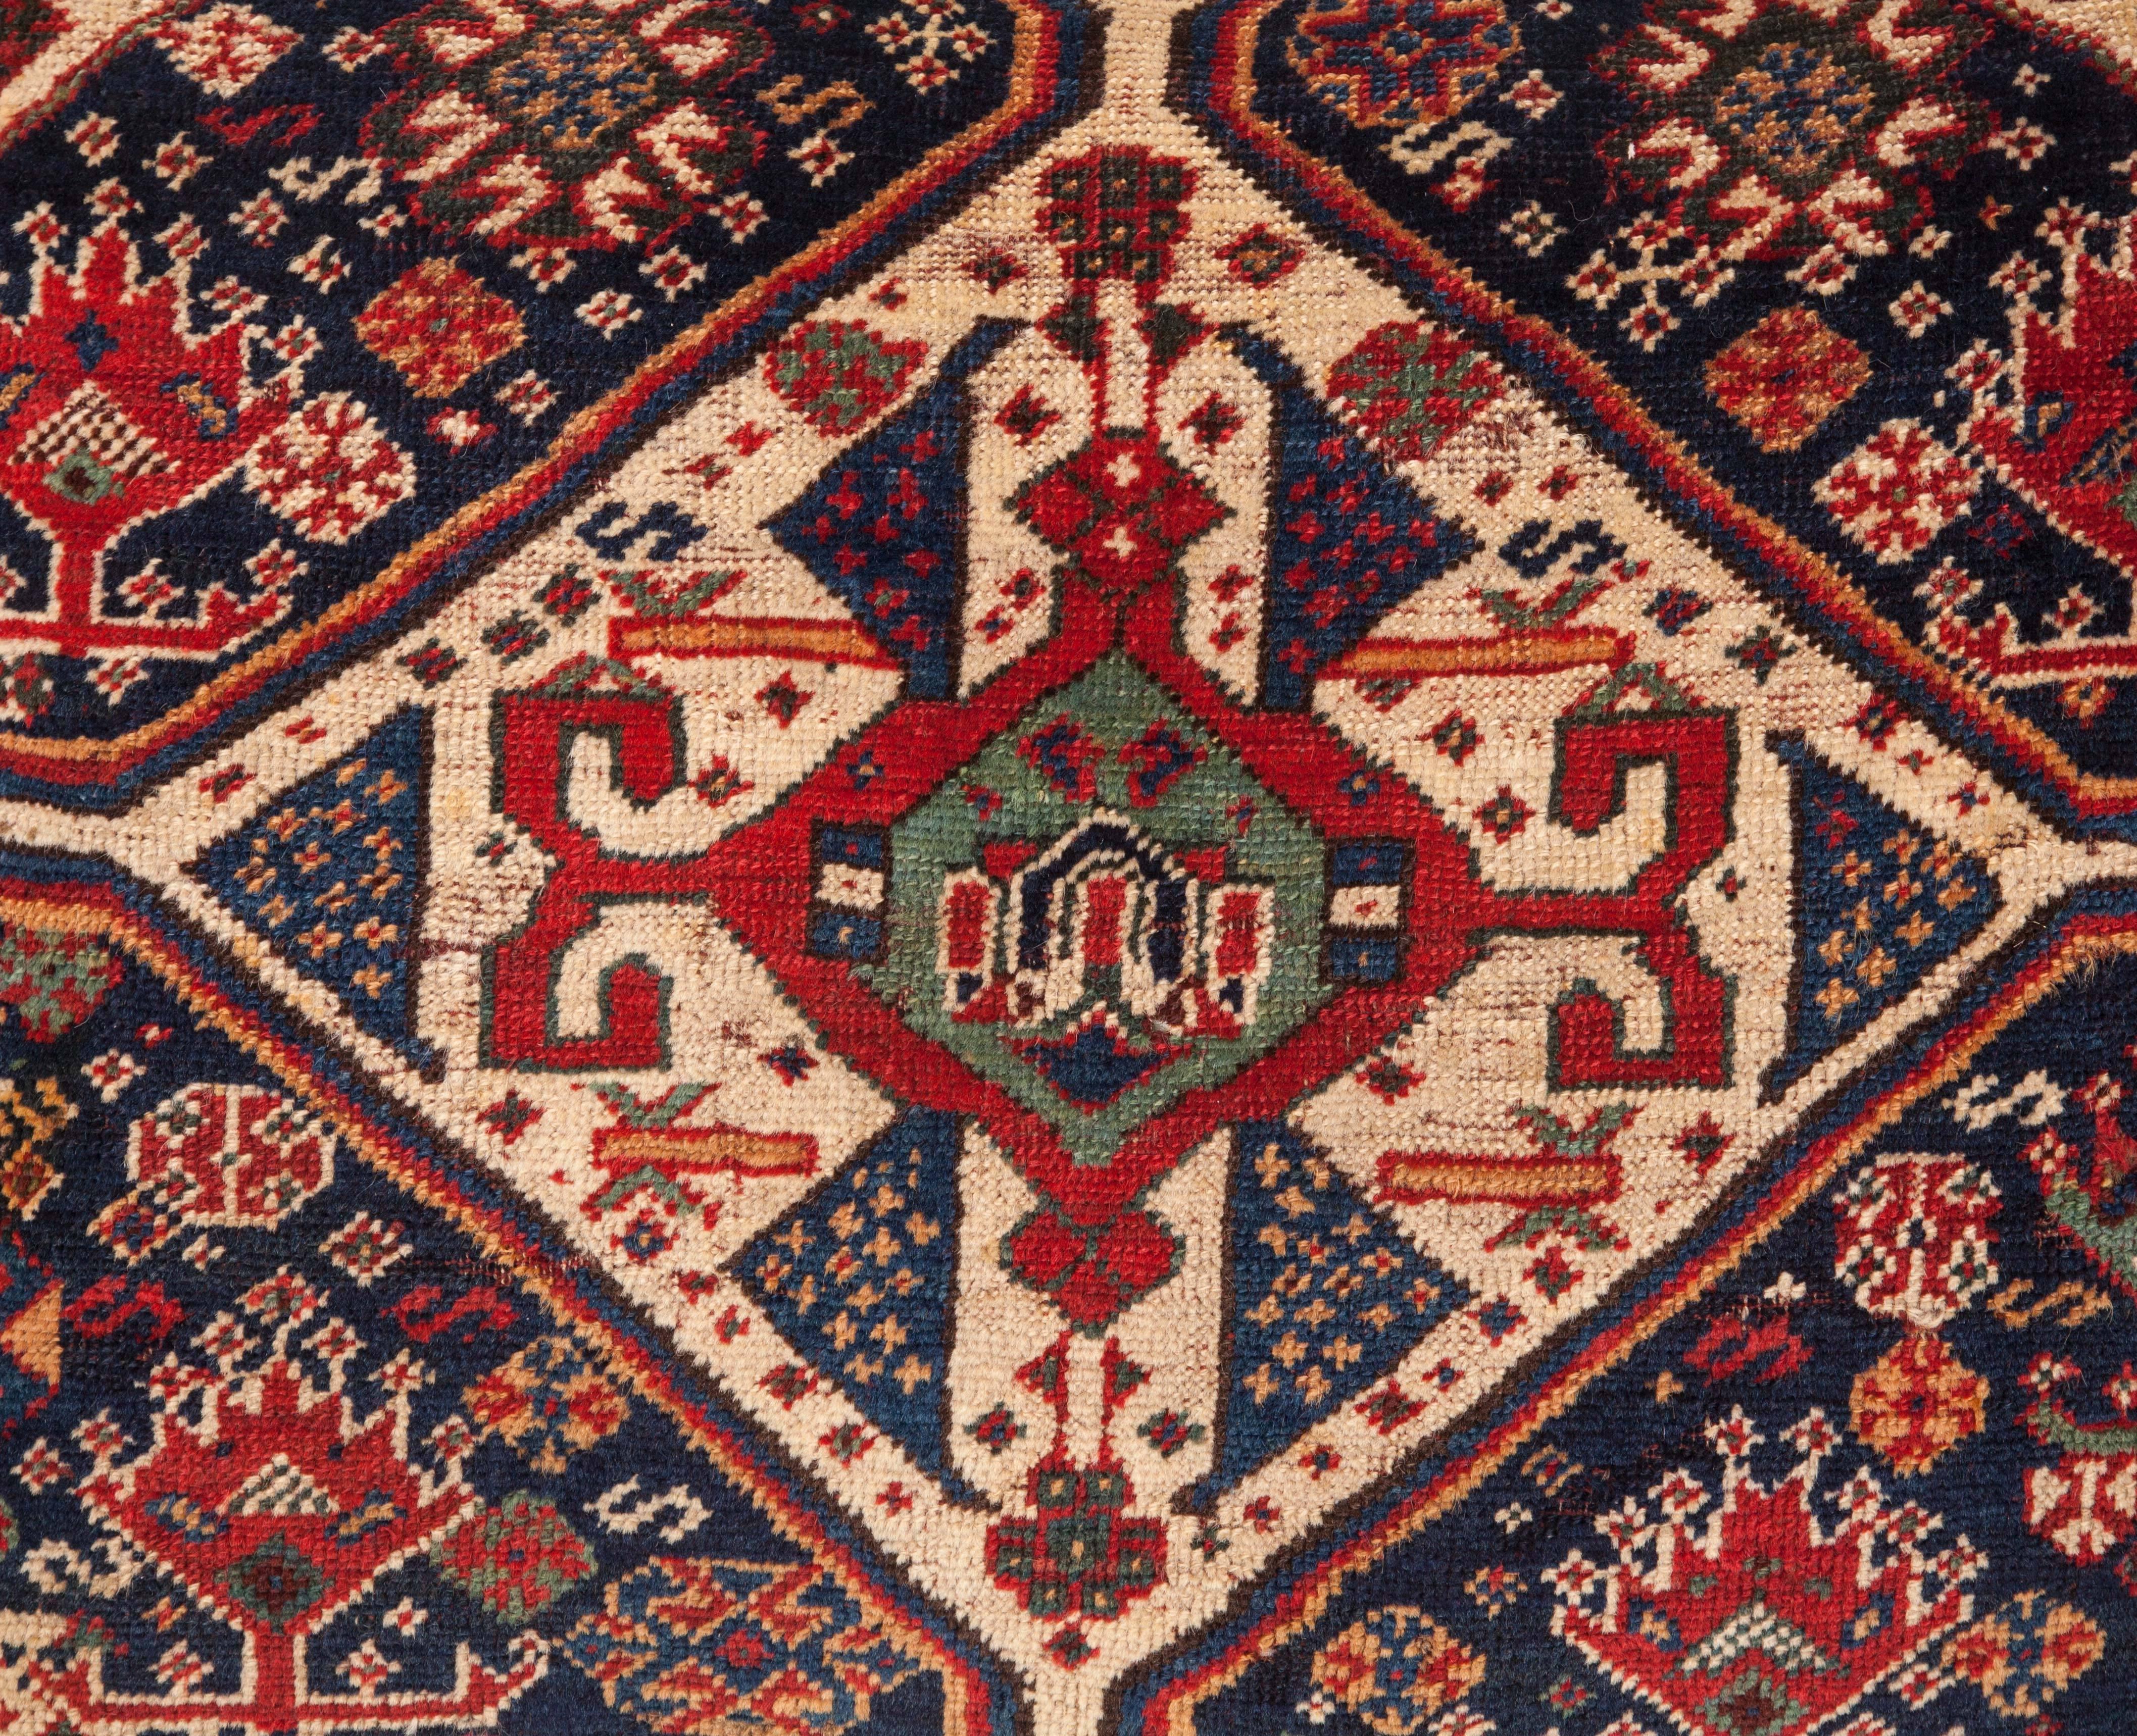 Tribal Antique Pillow Case Fashioned from an 19th Century Kashgai Rug Fragment